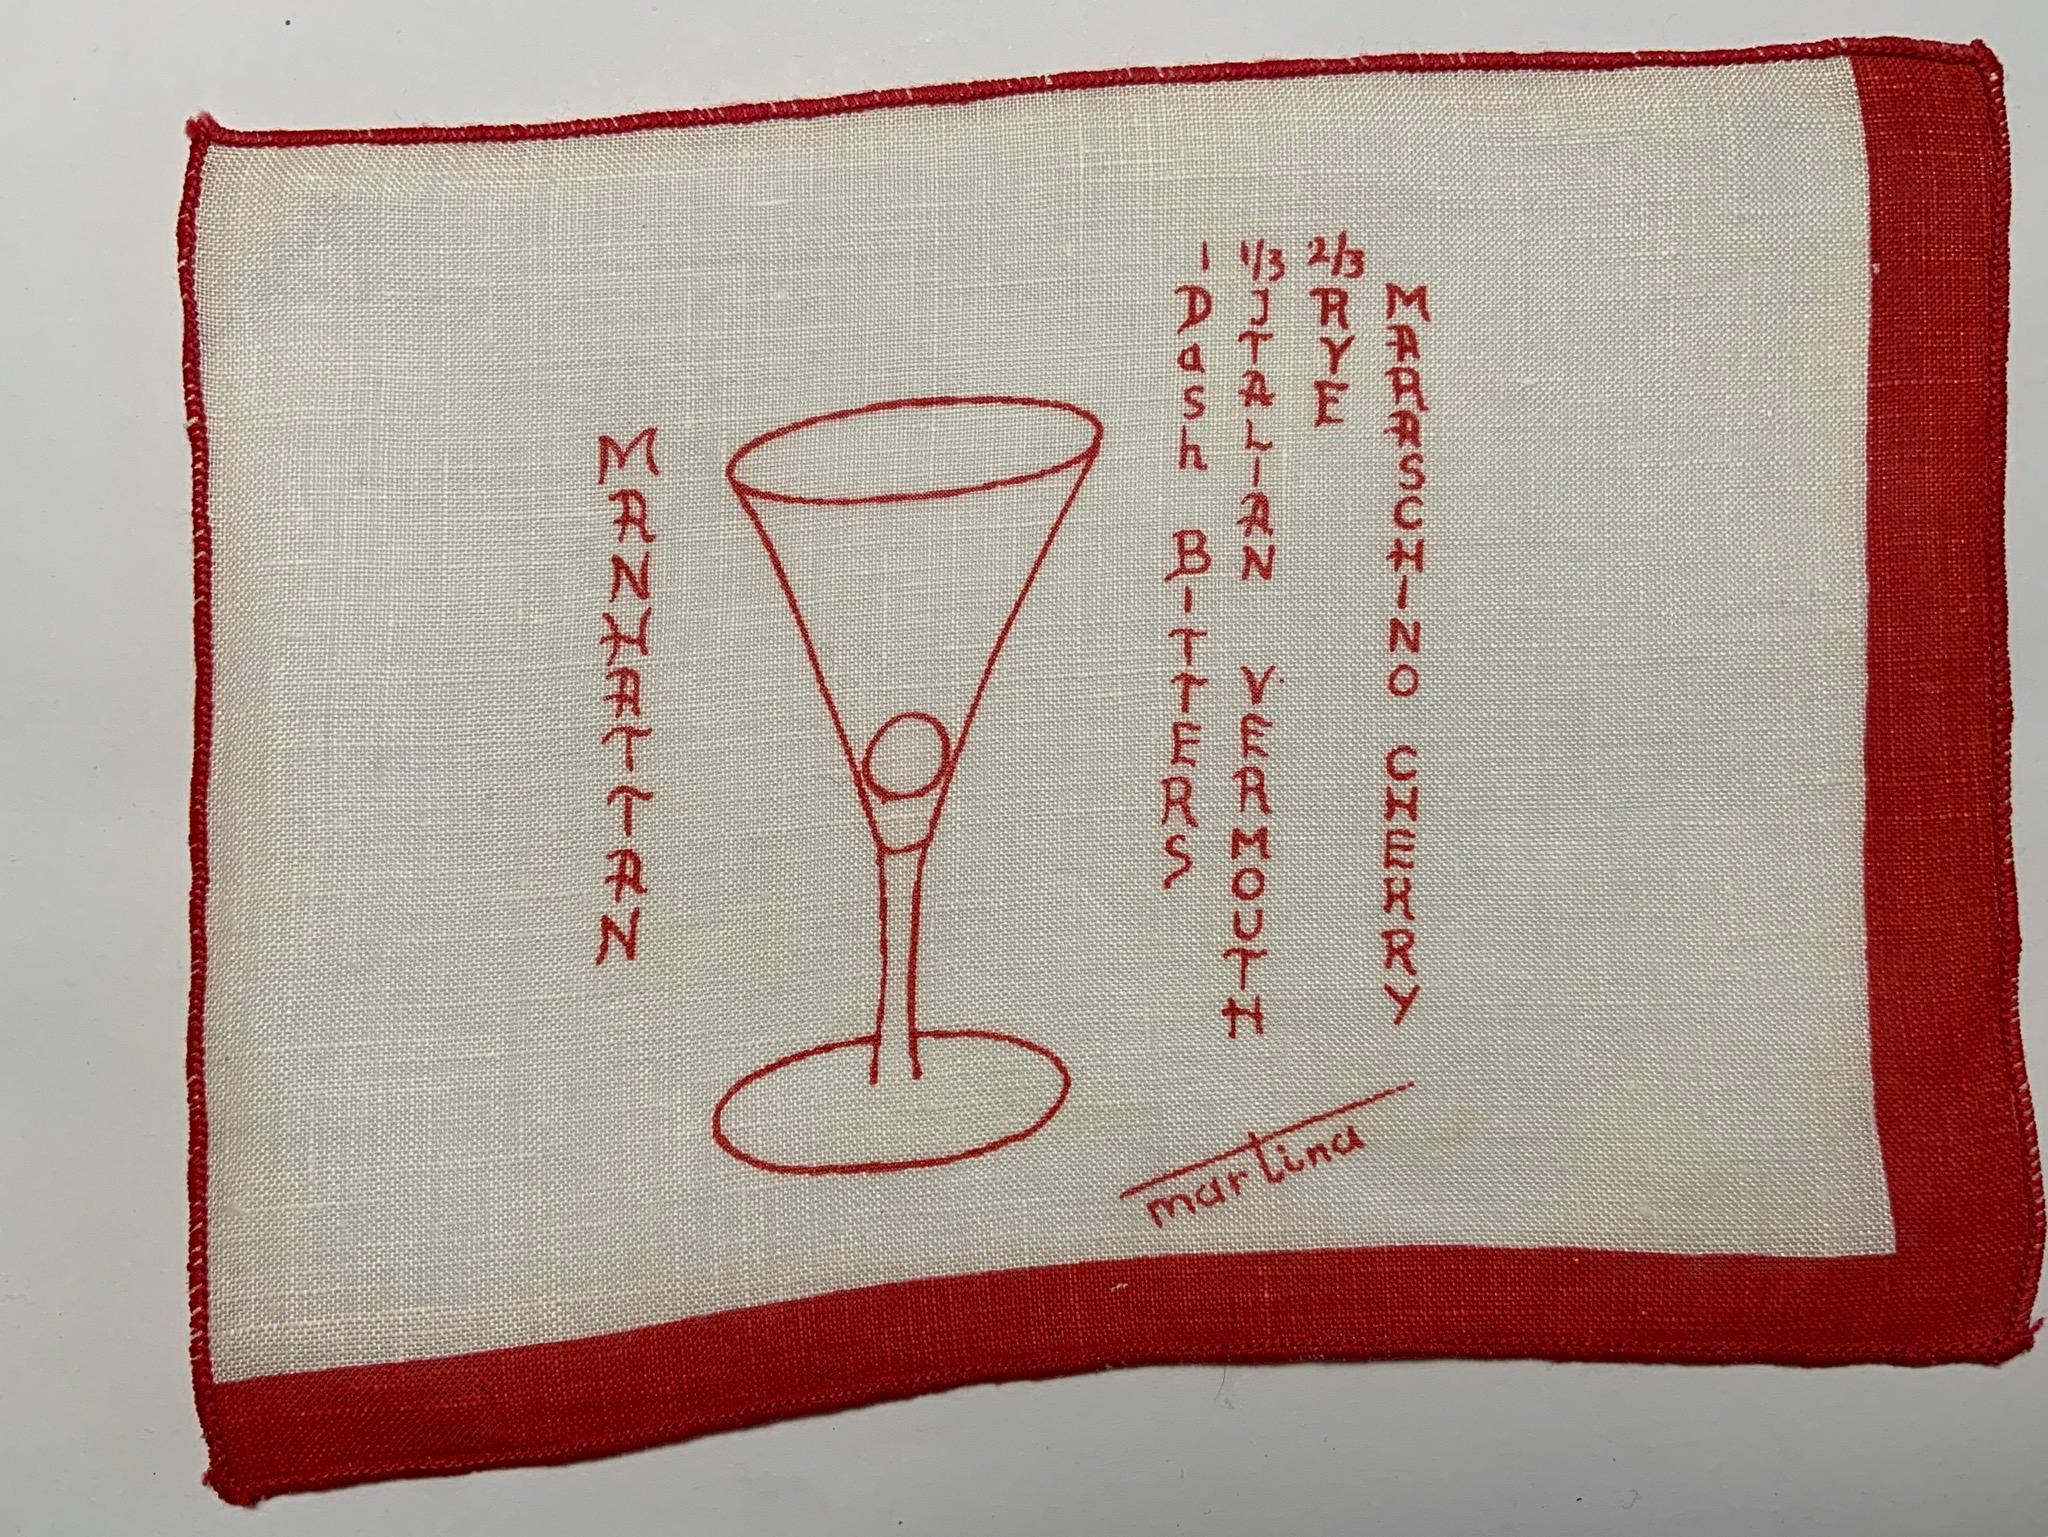 A fun set of eight printed linen cocktail napkins, each has a different cocktail, the correct glass and the ingredient list, already for the perfect drink. The set includes one each of Manhattan, Dry Martini, Old Fashioned, Daiquiri, Whiskey Sour,